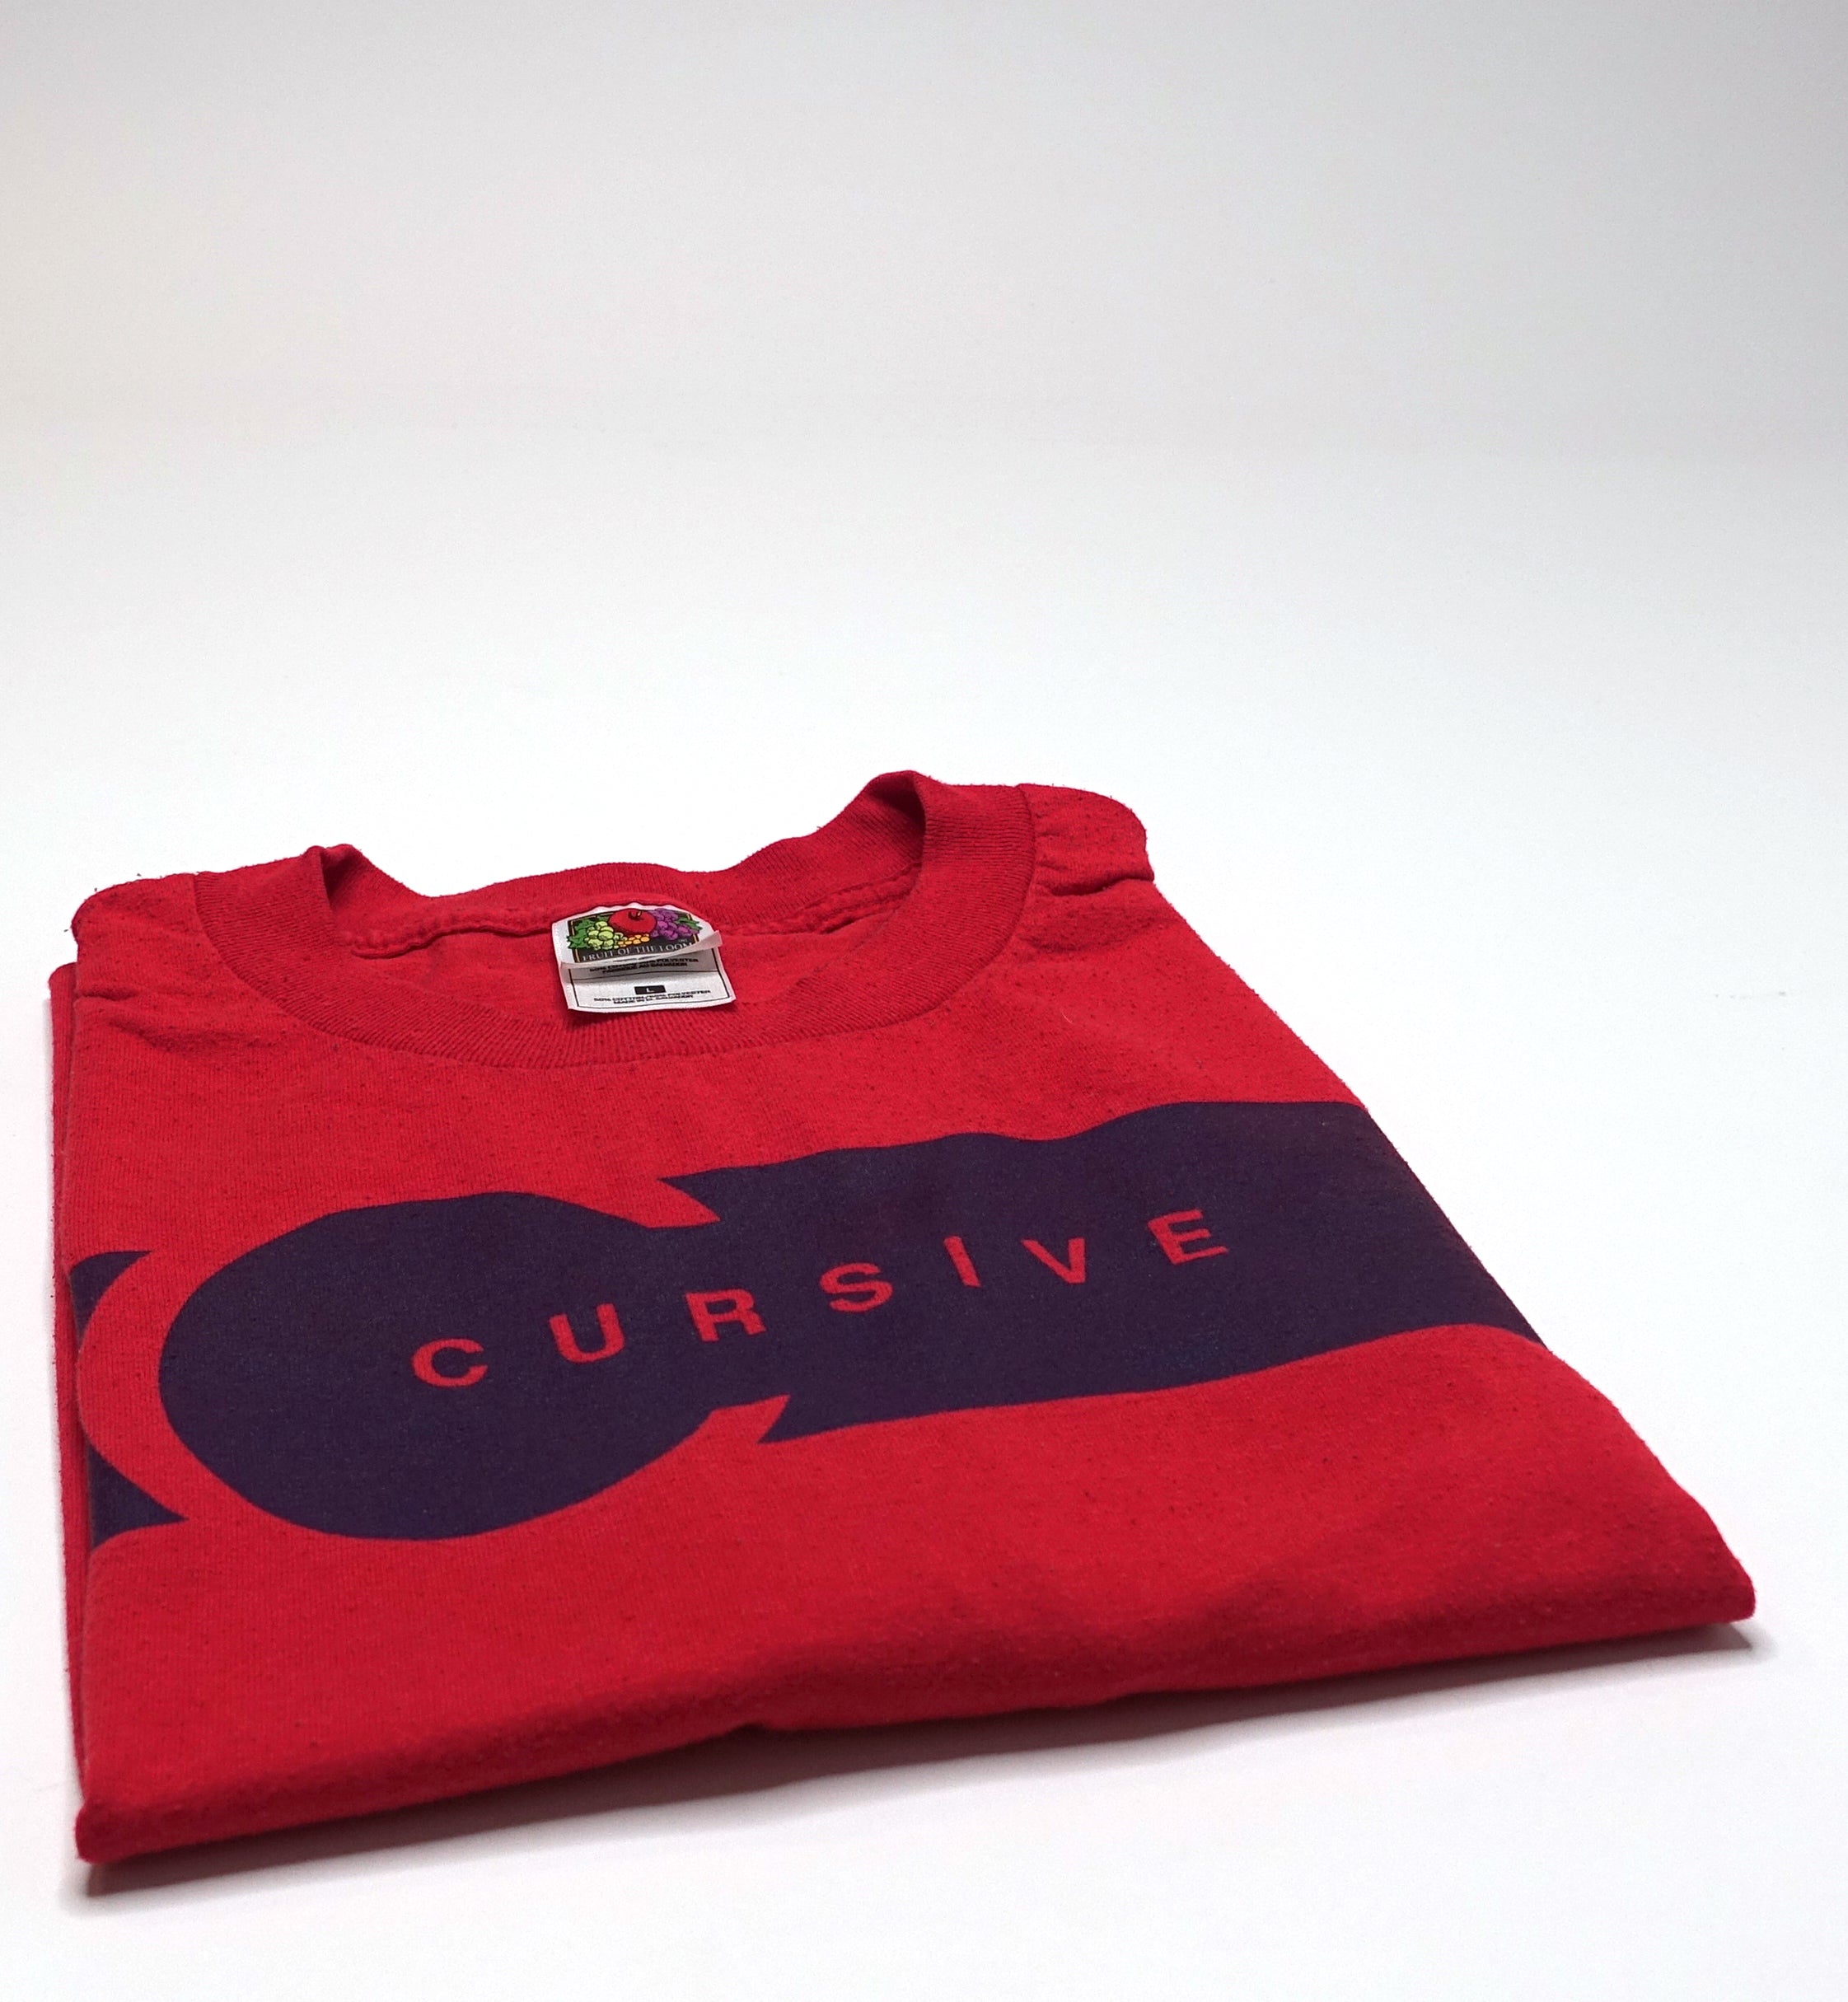 Cursive - Sucker And Dry late 90s/Early 00s Tour Shirt Size Large